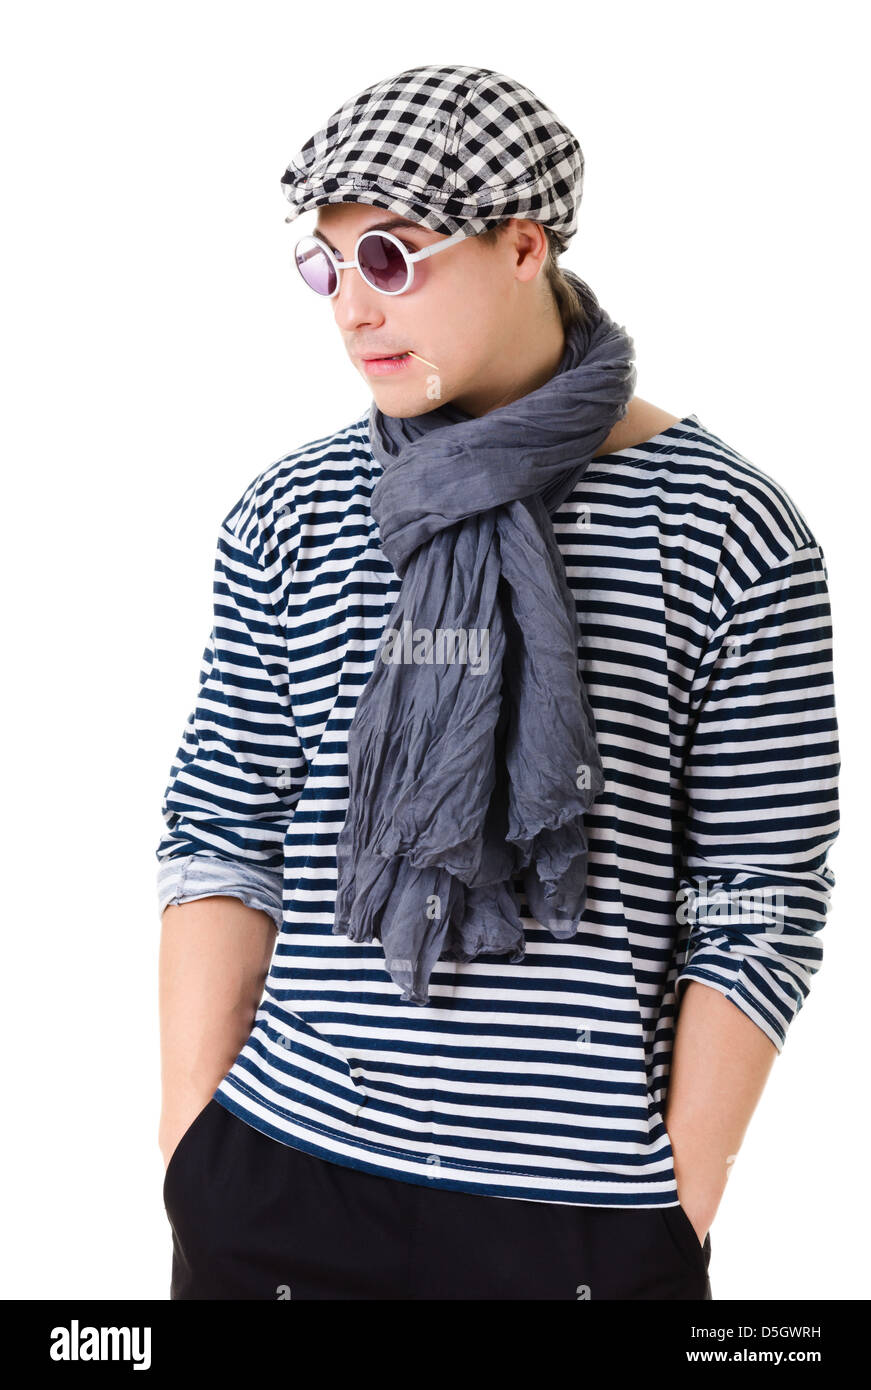 Young retro stylish man in striped clothes, glasses and hat isolated on white background Stock Photo